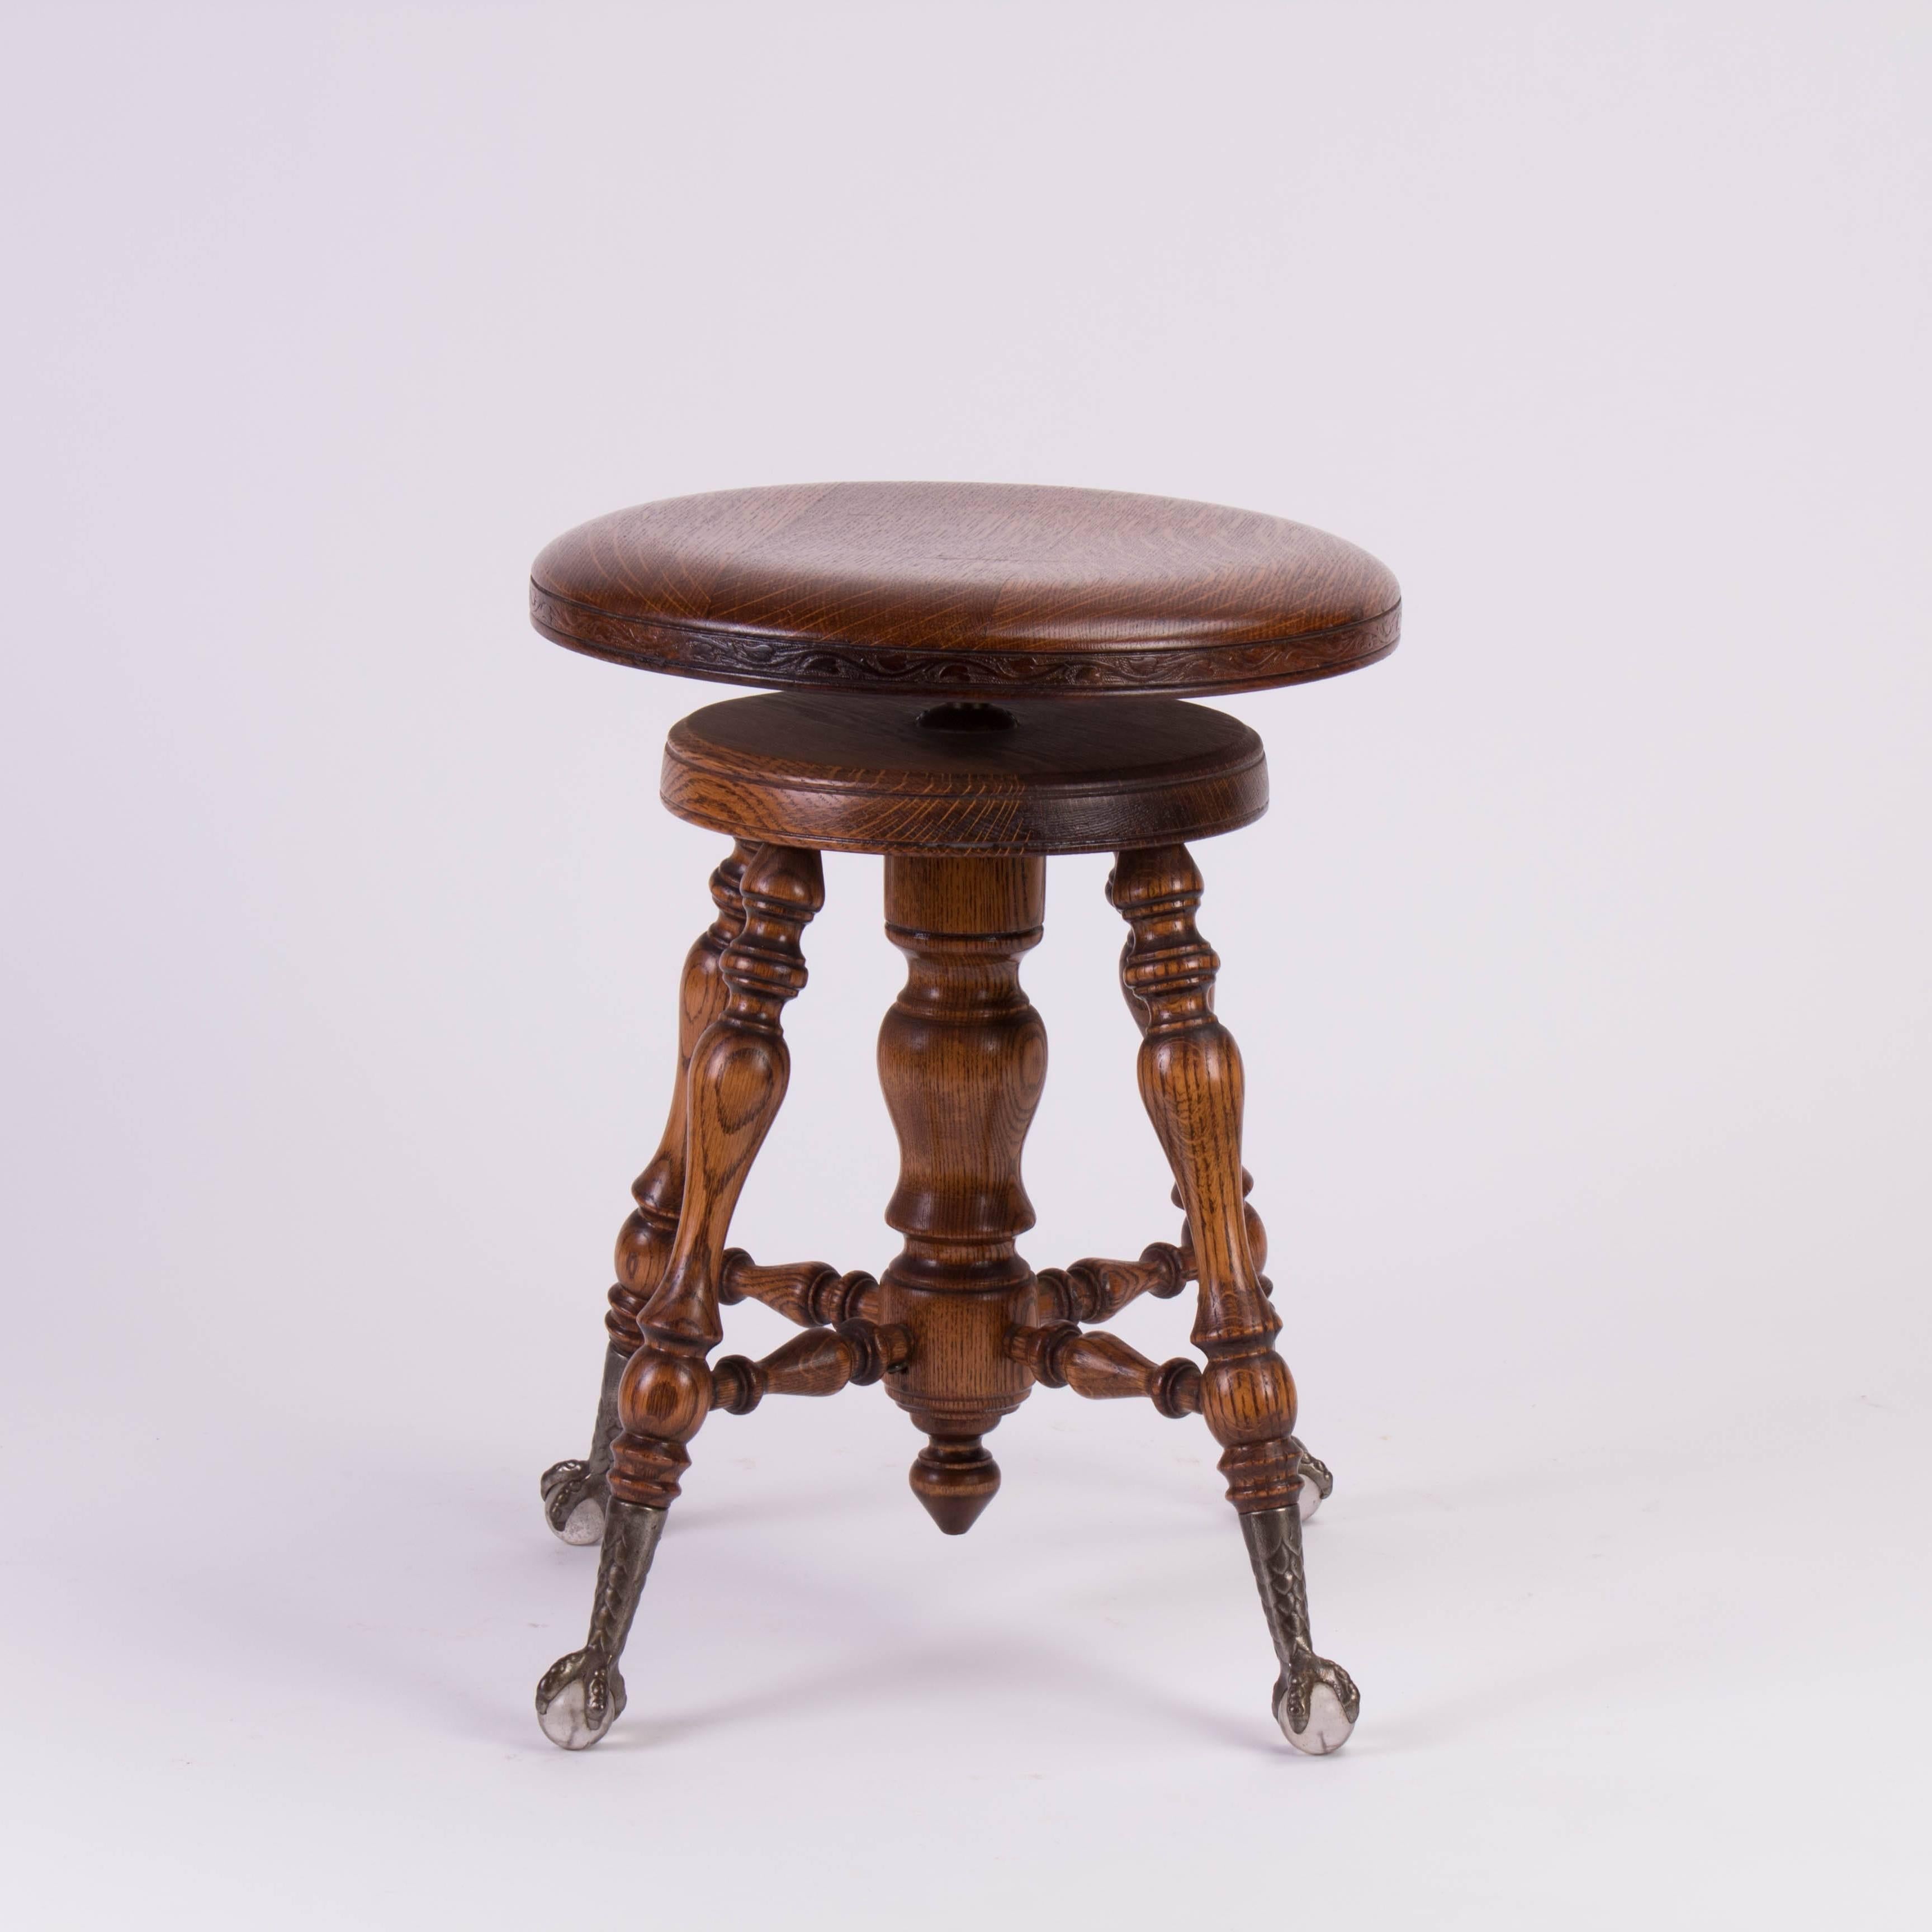 Late Victorian 1800s adjustable piano stool in solid wood, features four beautiful copper patina talon claw feet each grasping a clear crystal ball.